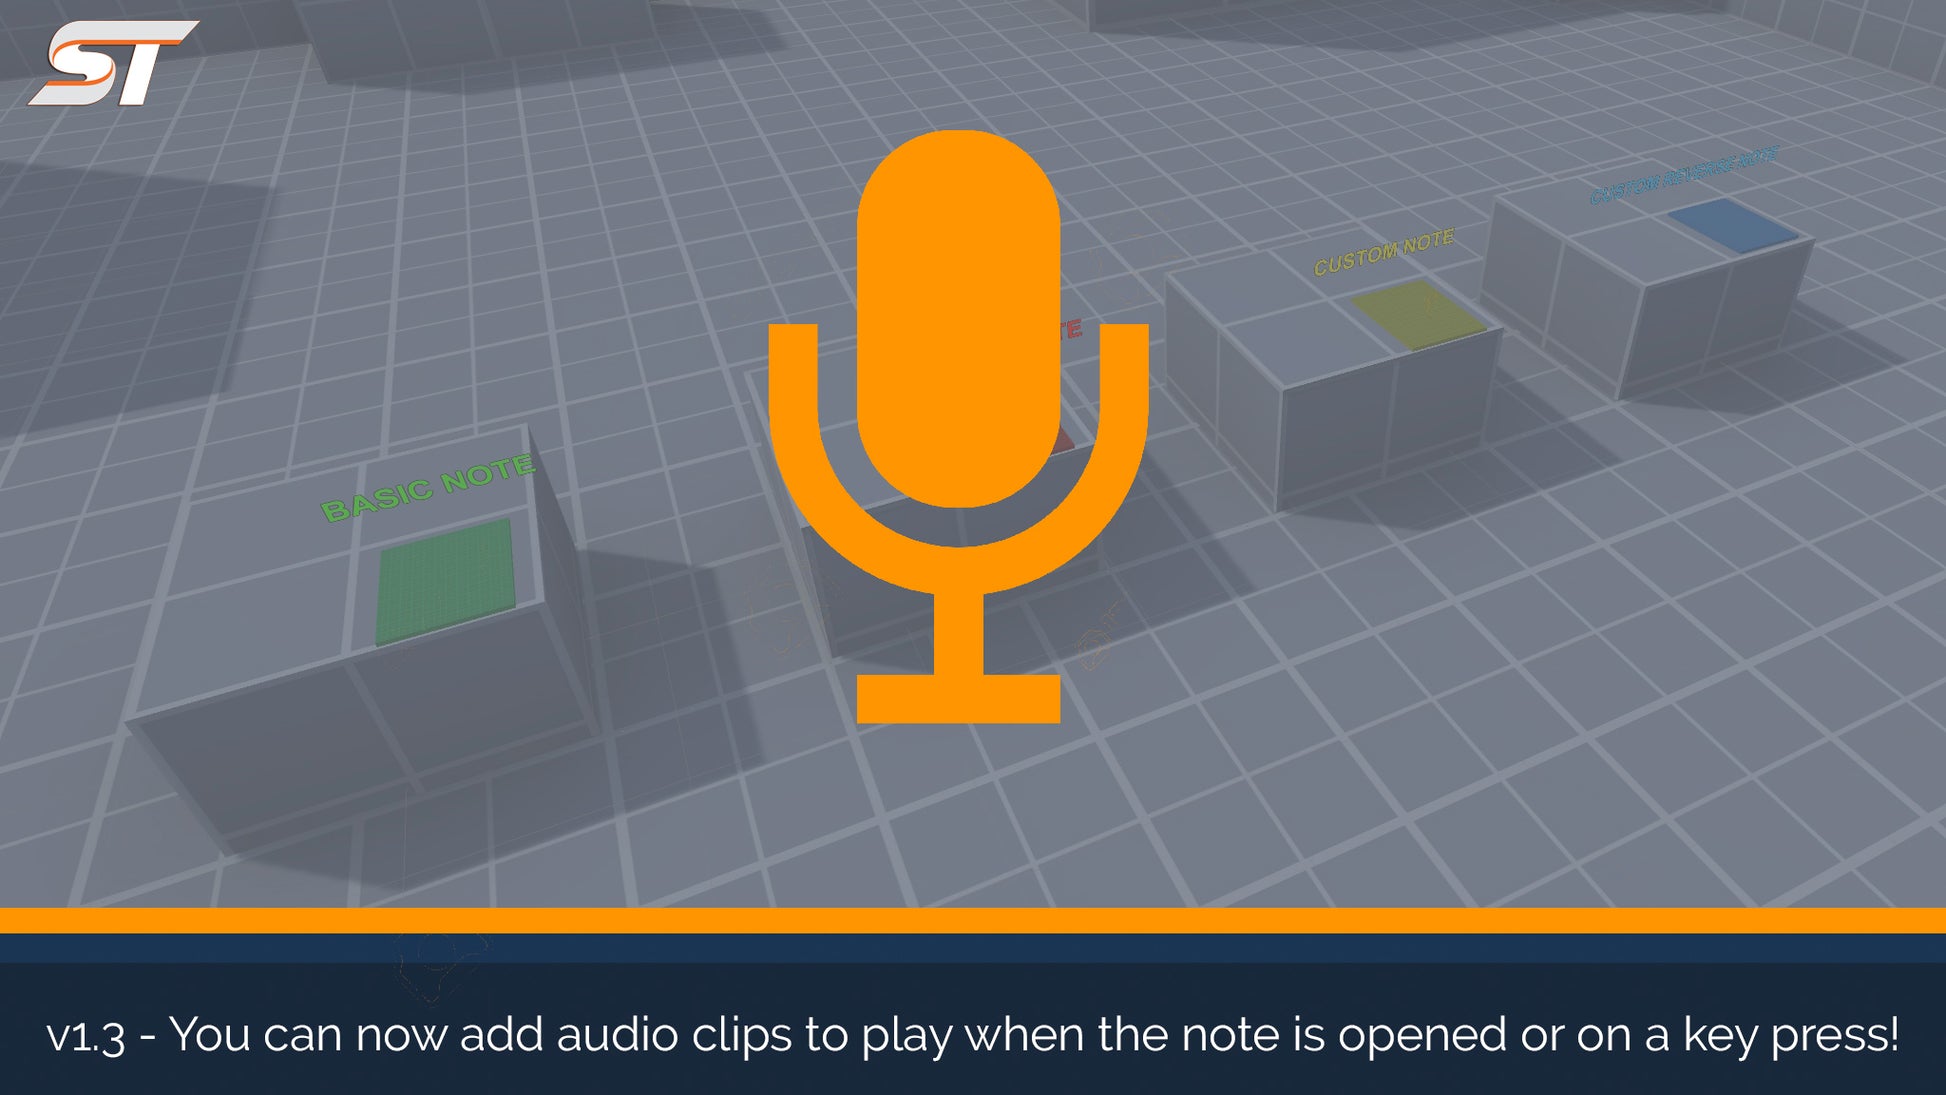 screenshot to tell the user that the note system allows audio playback